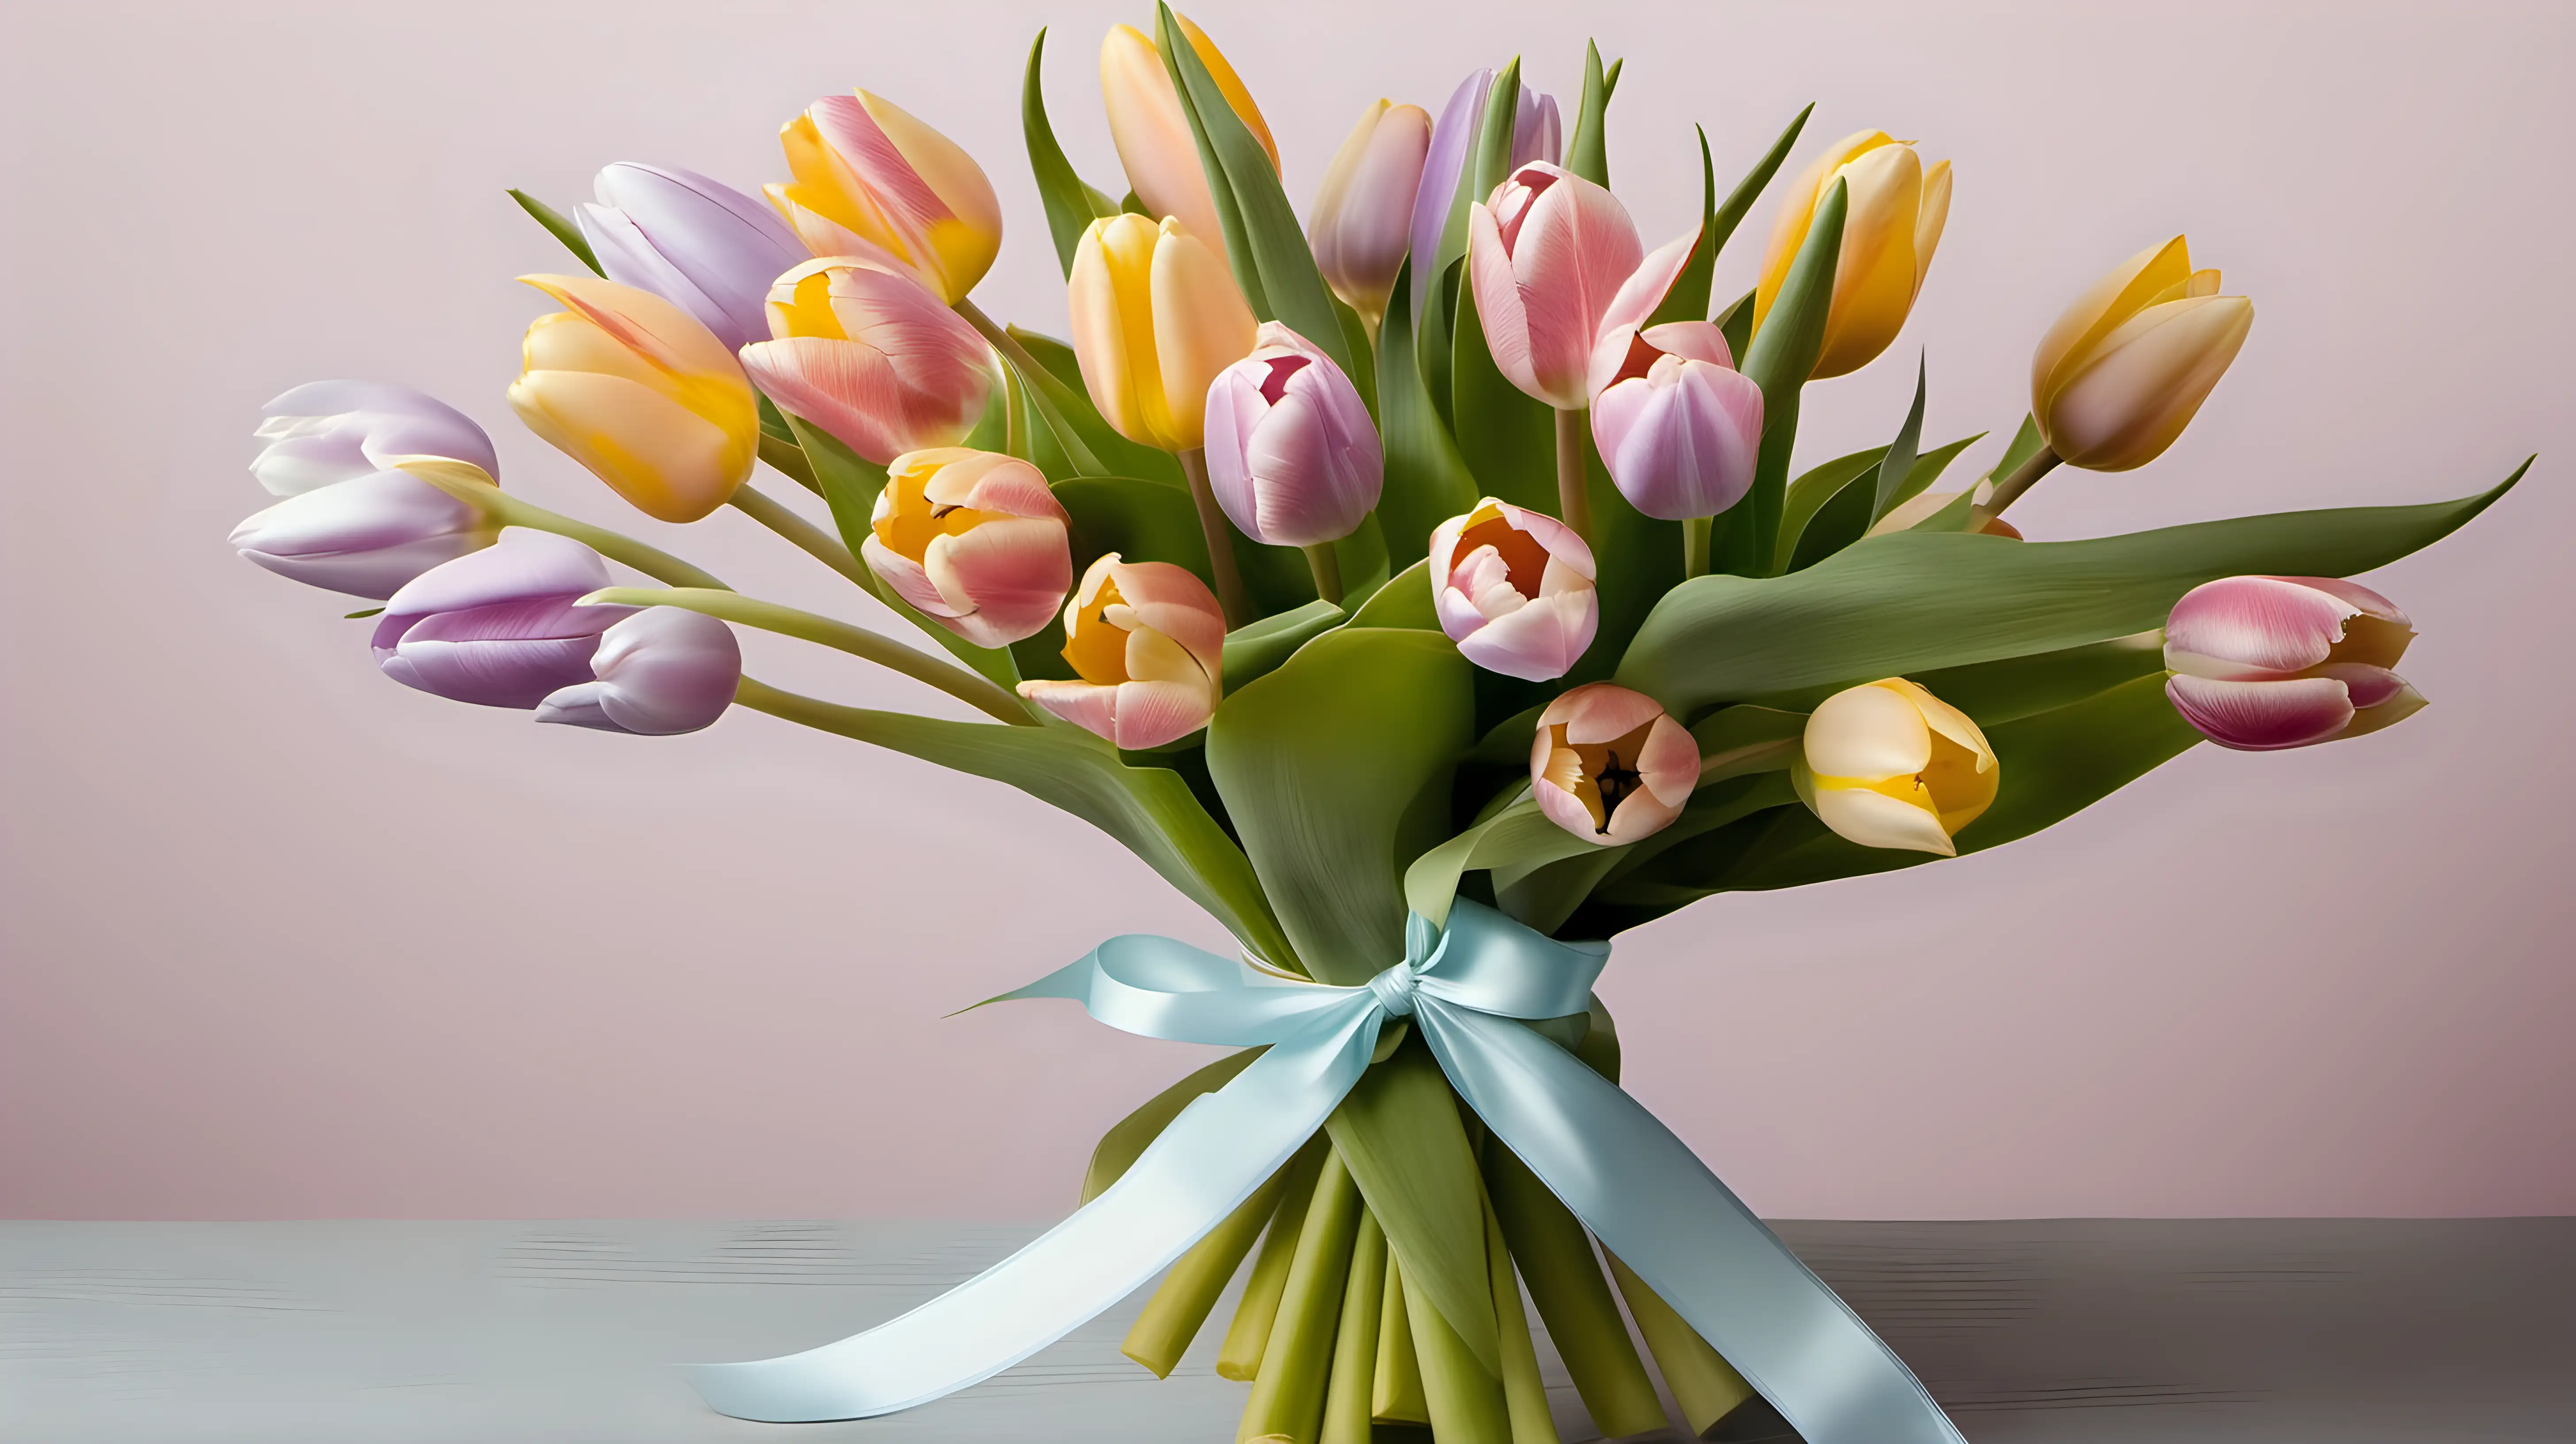 A charming bouquet of pastel-colored tulips tied with a delicate ribbon, evoking feelings of tenderness and romance.